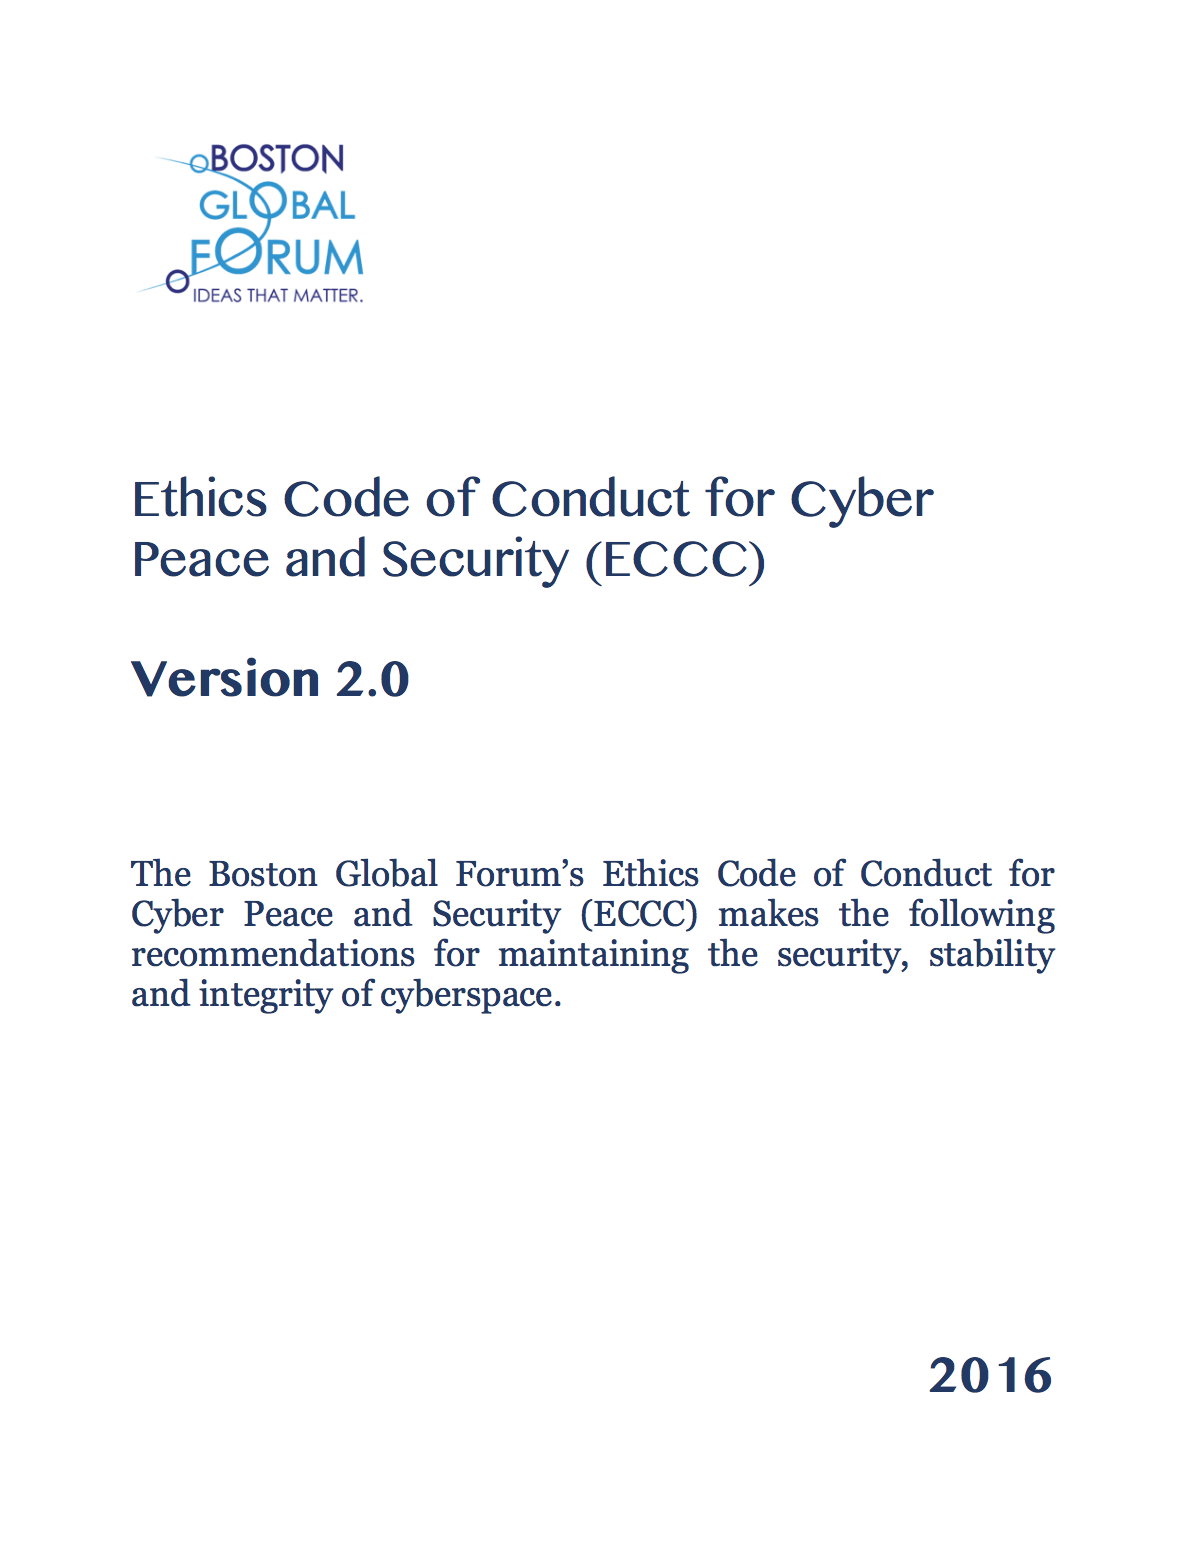 Ethics Code of Conduct for Cyber Peace and Security (ECCC) Version 2.0